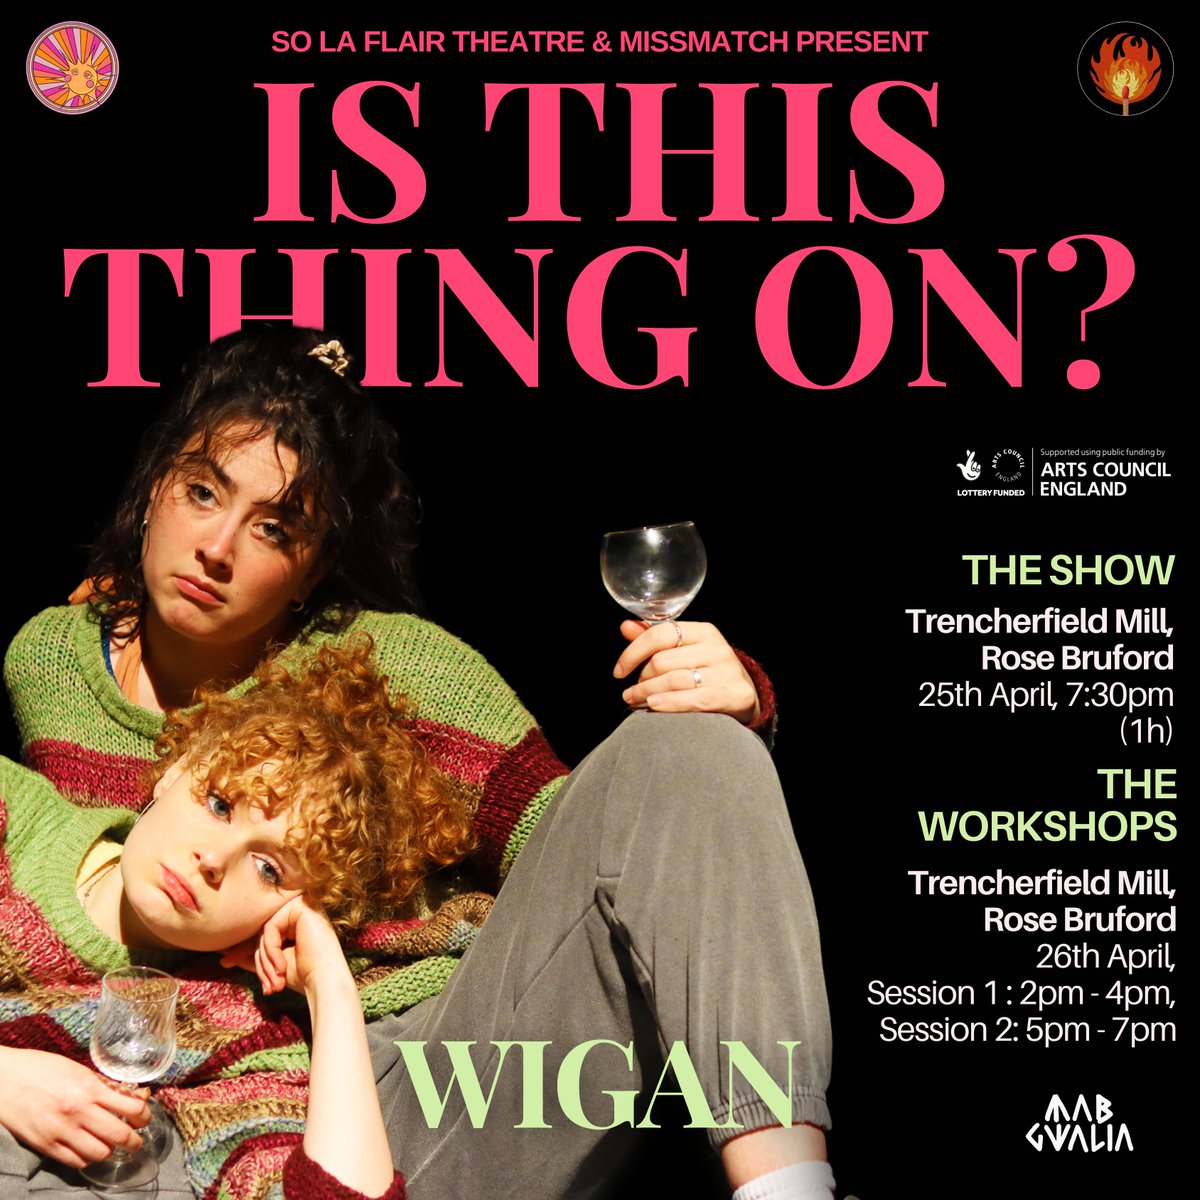 WIGAN!! This week we are coming to Rose Bruford Wigan at Trencherfield Mill on Heritage Way with our show ‘Is This Thing On?’ this Thursday 25th April, 7:30pm💖 Tickets: fatsoma.com/e/rdntsbql/is-…🌟 + free workshops on Friday 26th April: tickettailor.com/events/solafla…